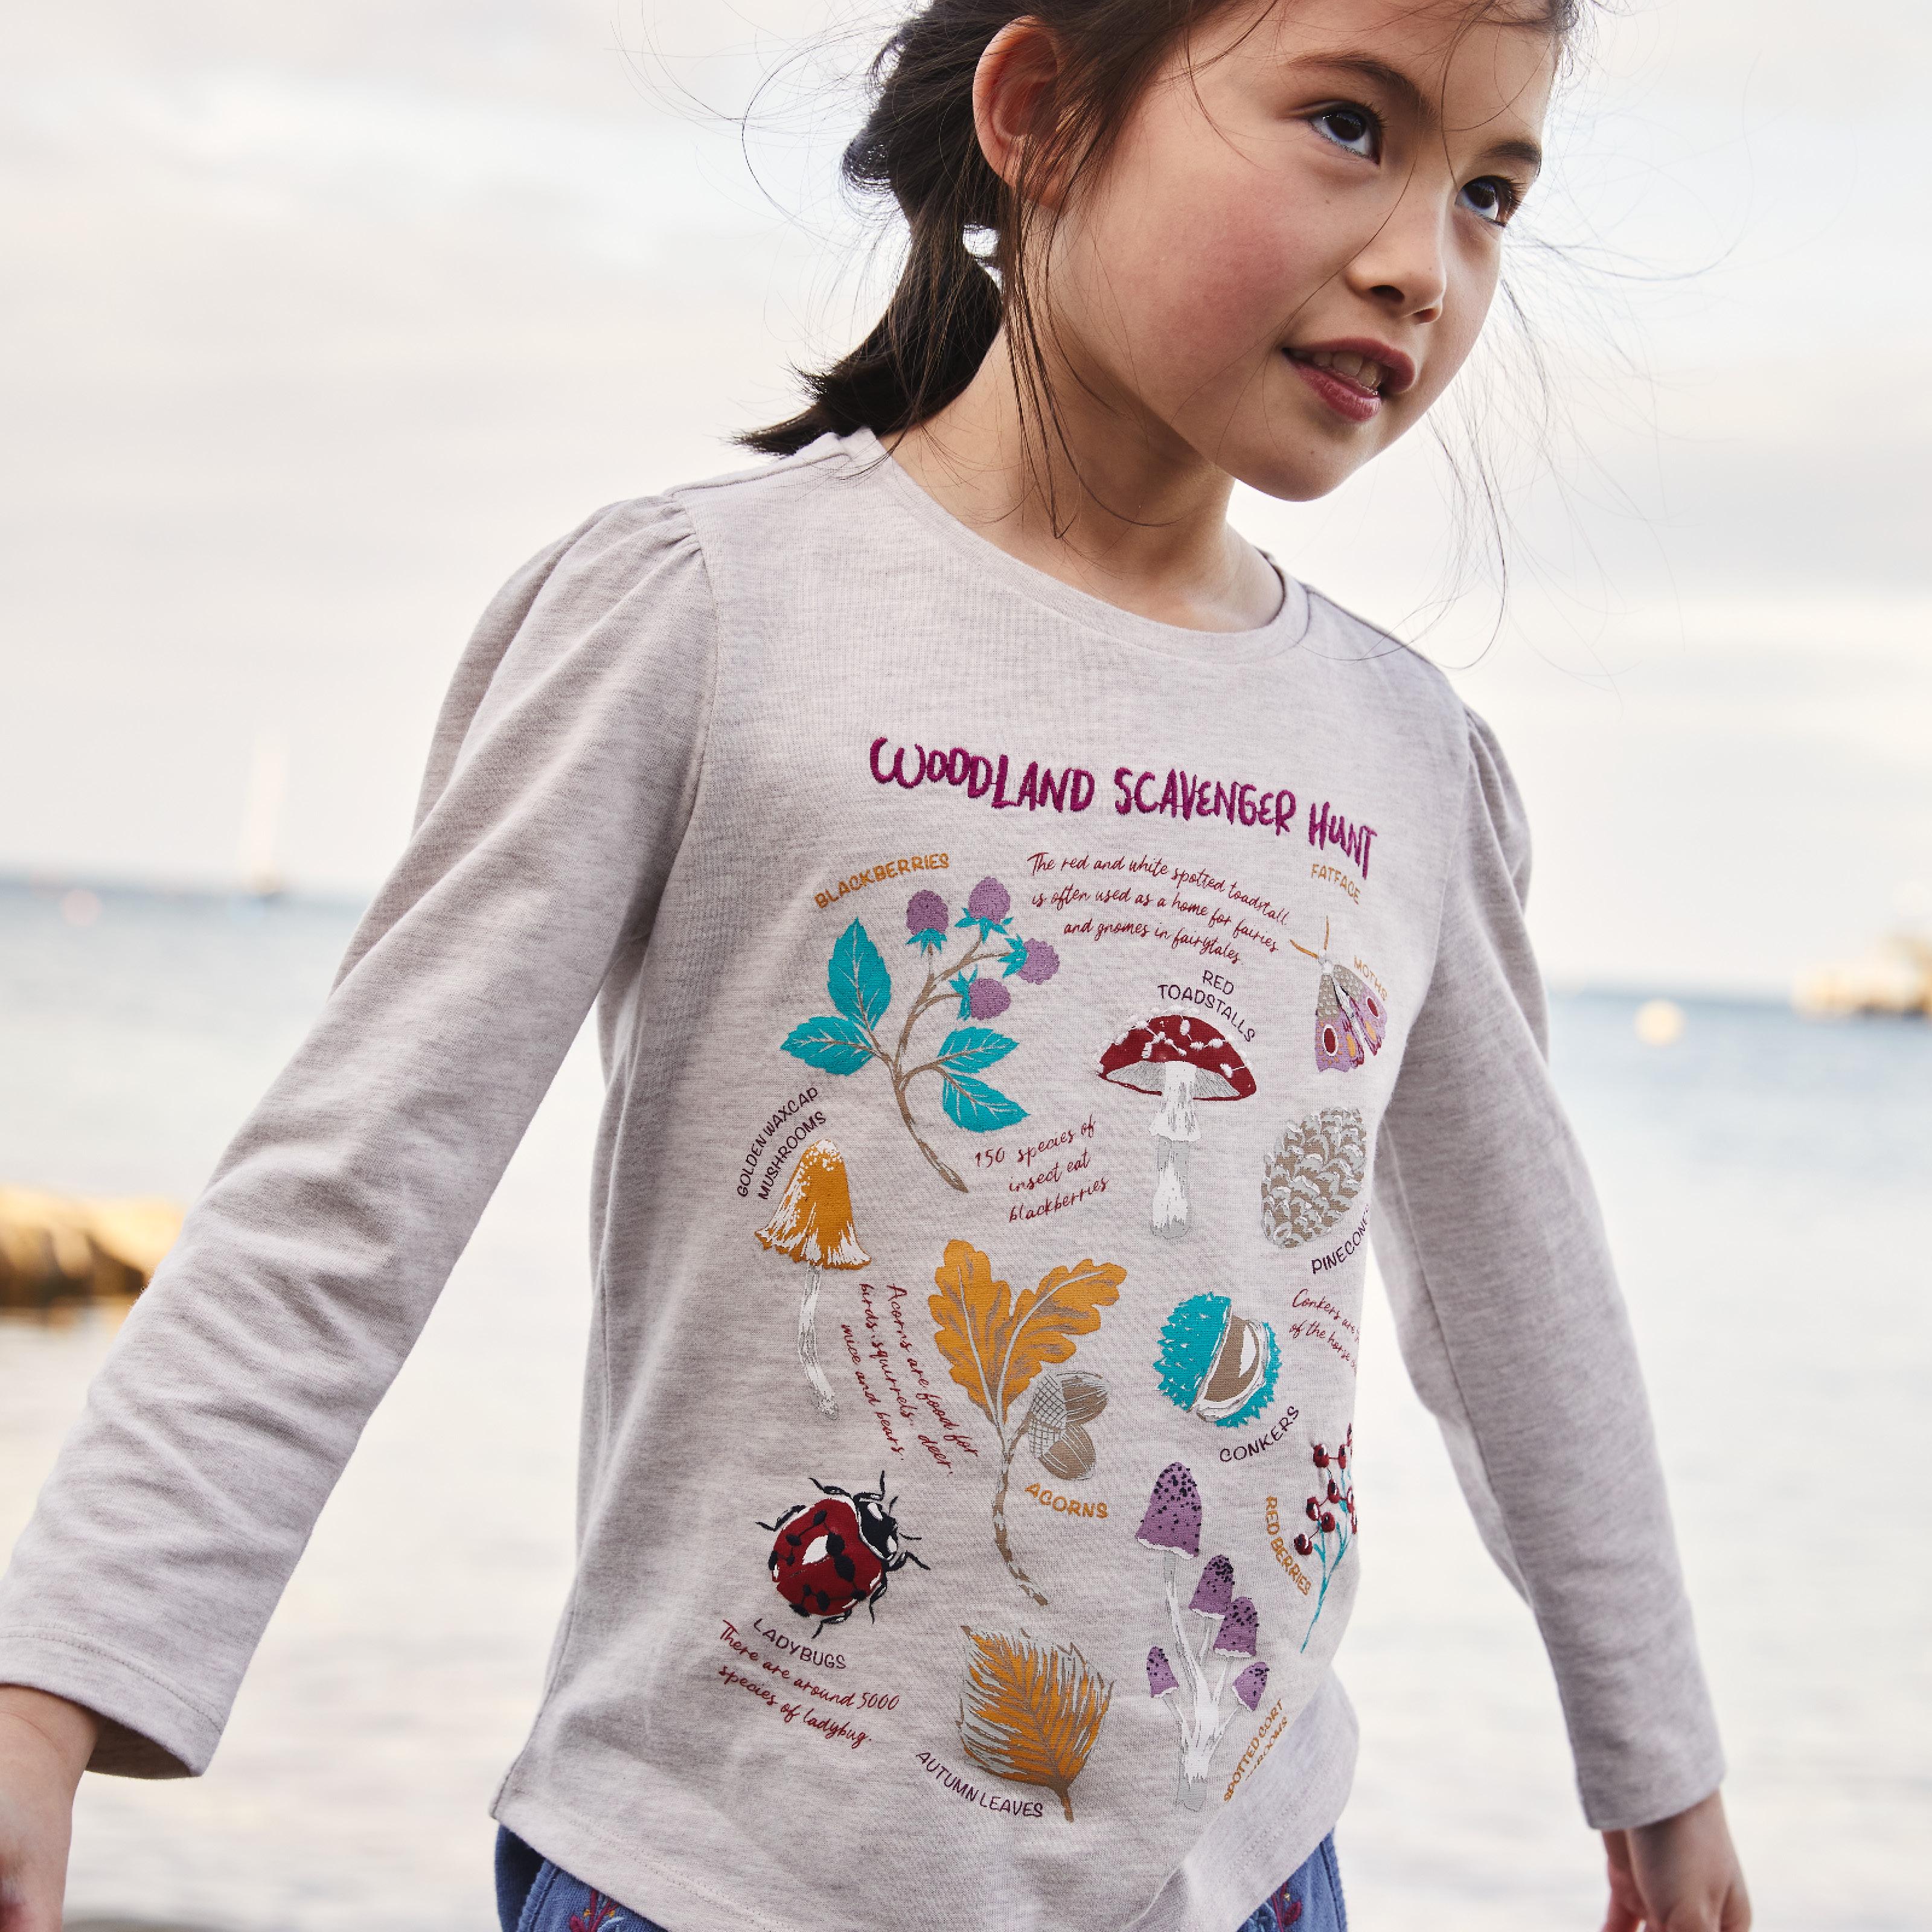 Girl wearing a long-sleeved ecru-coloured T-shirt with 'Woodland Scavenger Hunt' illustrations of insects & plants.